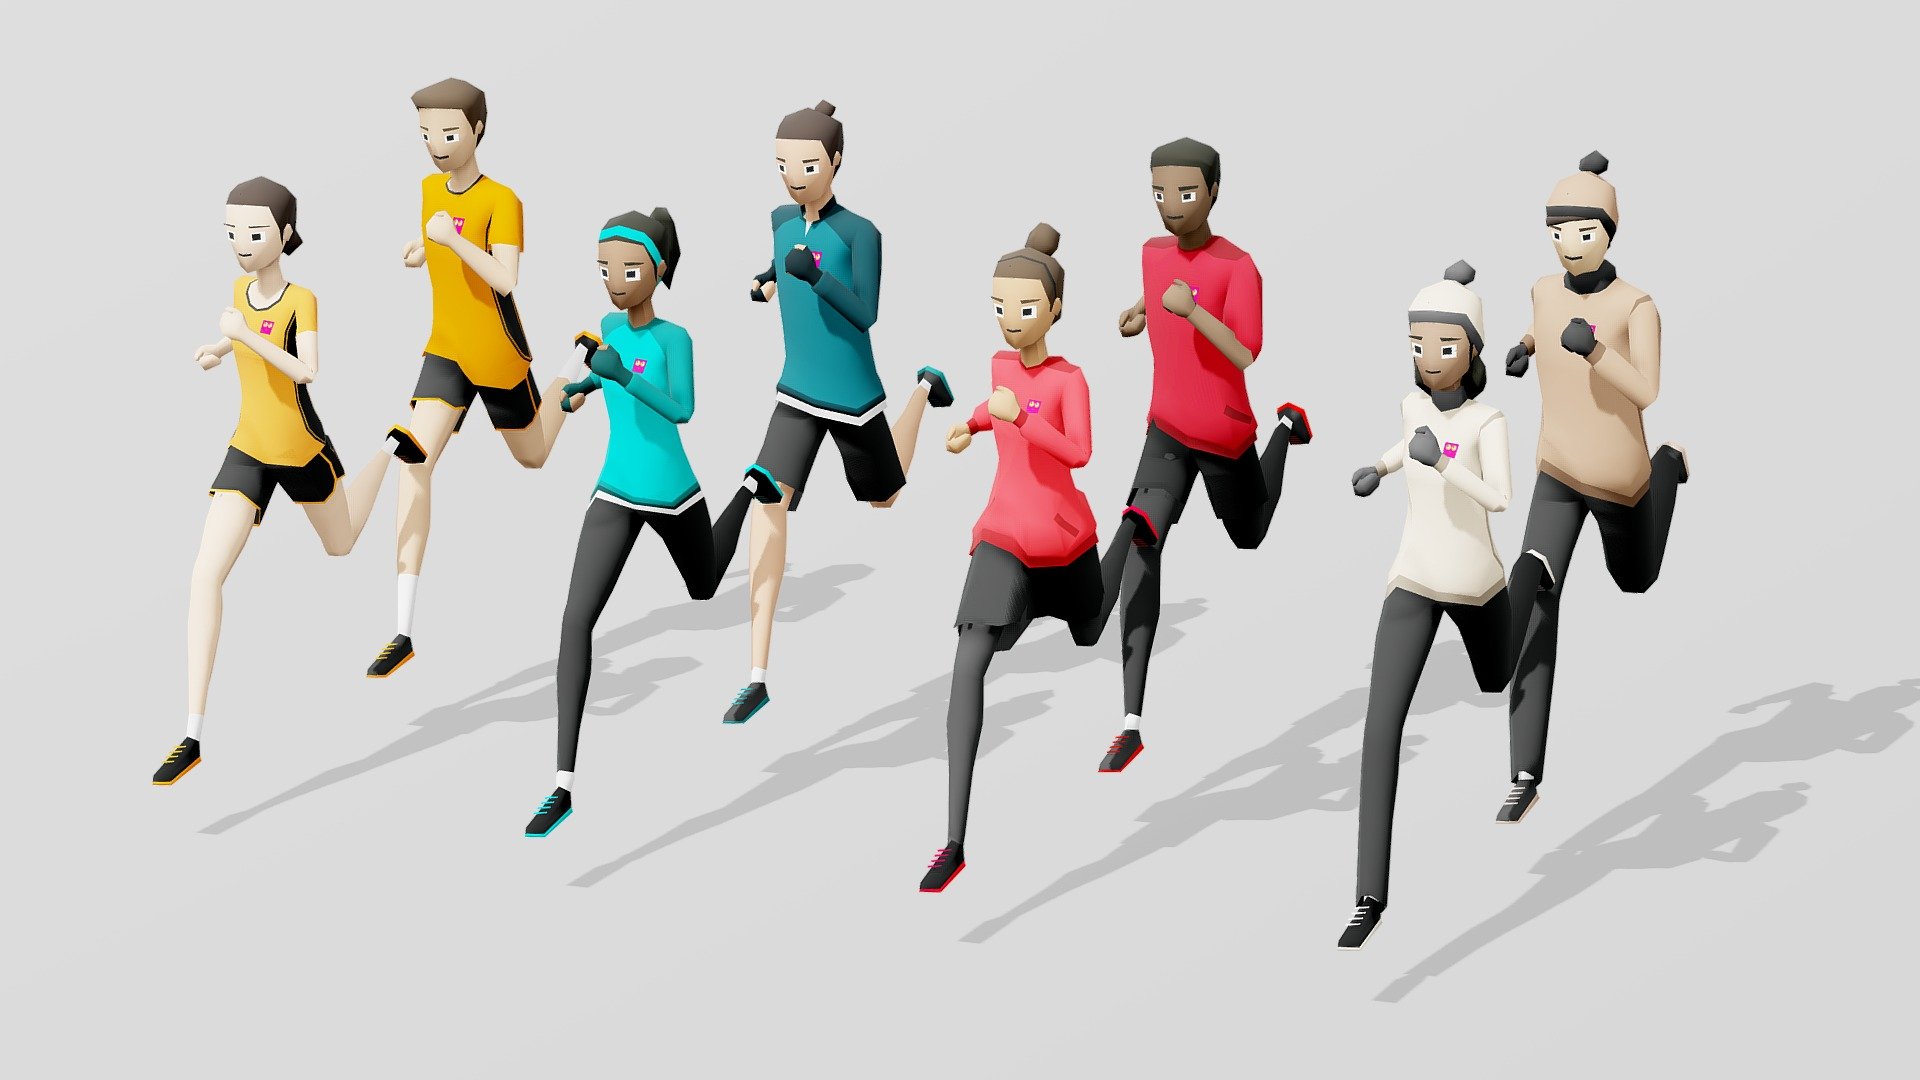 A runner character pack made exclusively for the AllBlazing app. www.allblazing.io - AllBlazing runner character set - 3D model by Jan Bláha (@swifterik) 3d model